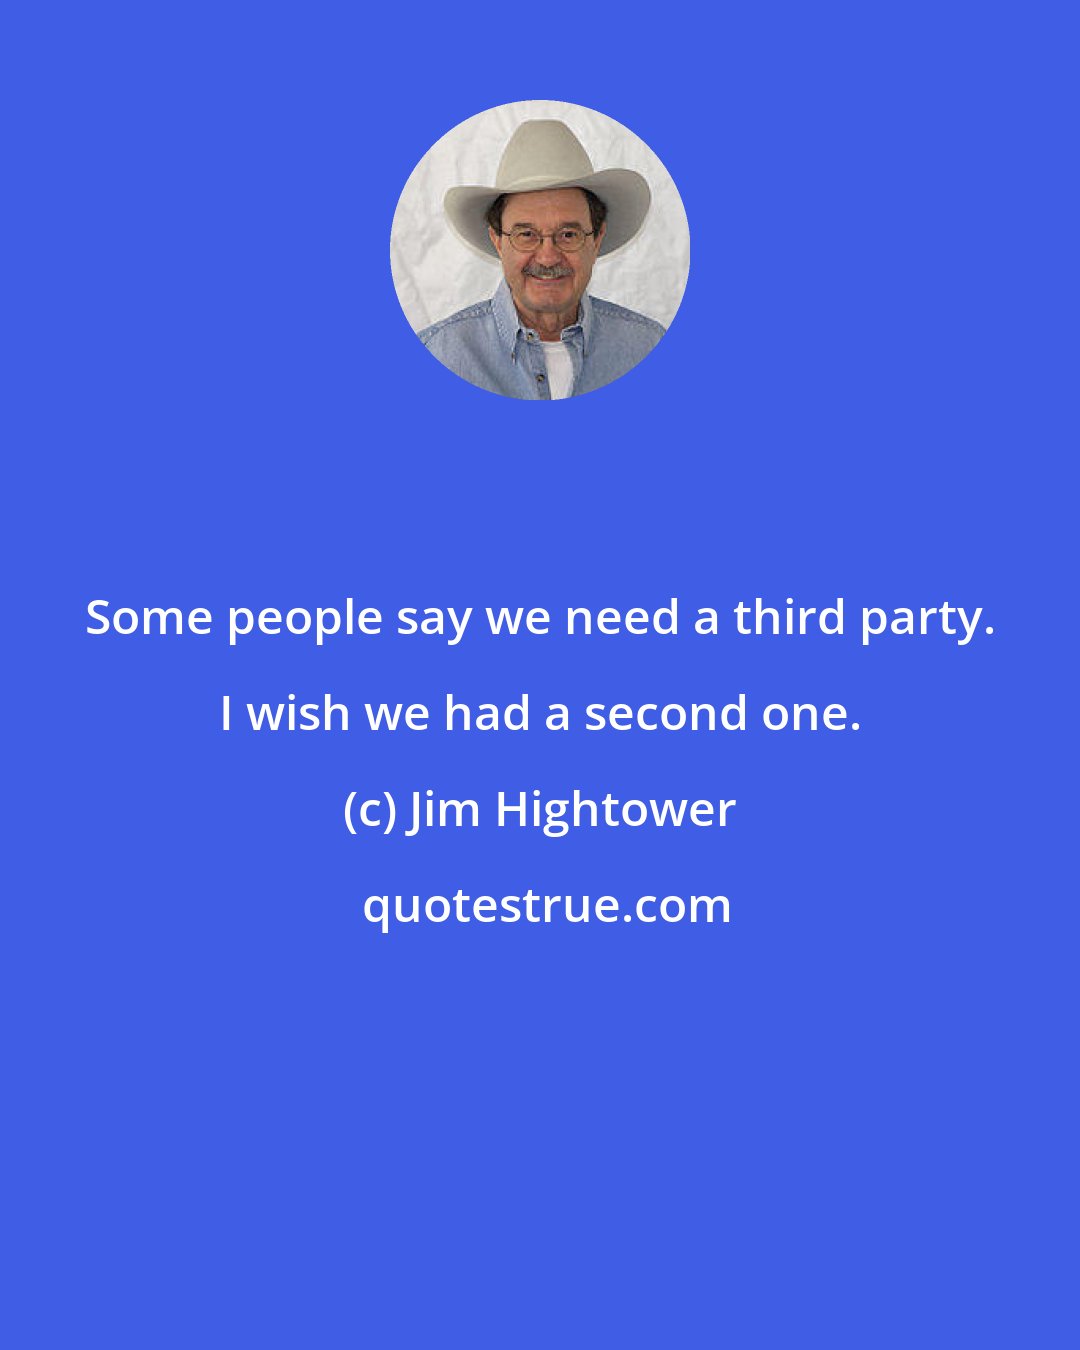 Jim Hightower: Some people say we need a third party. I wish we had a second one.